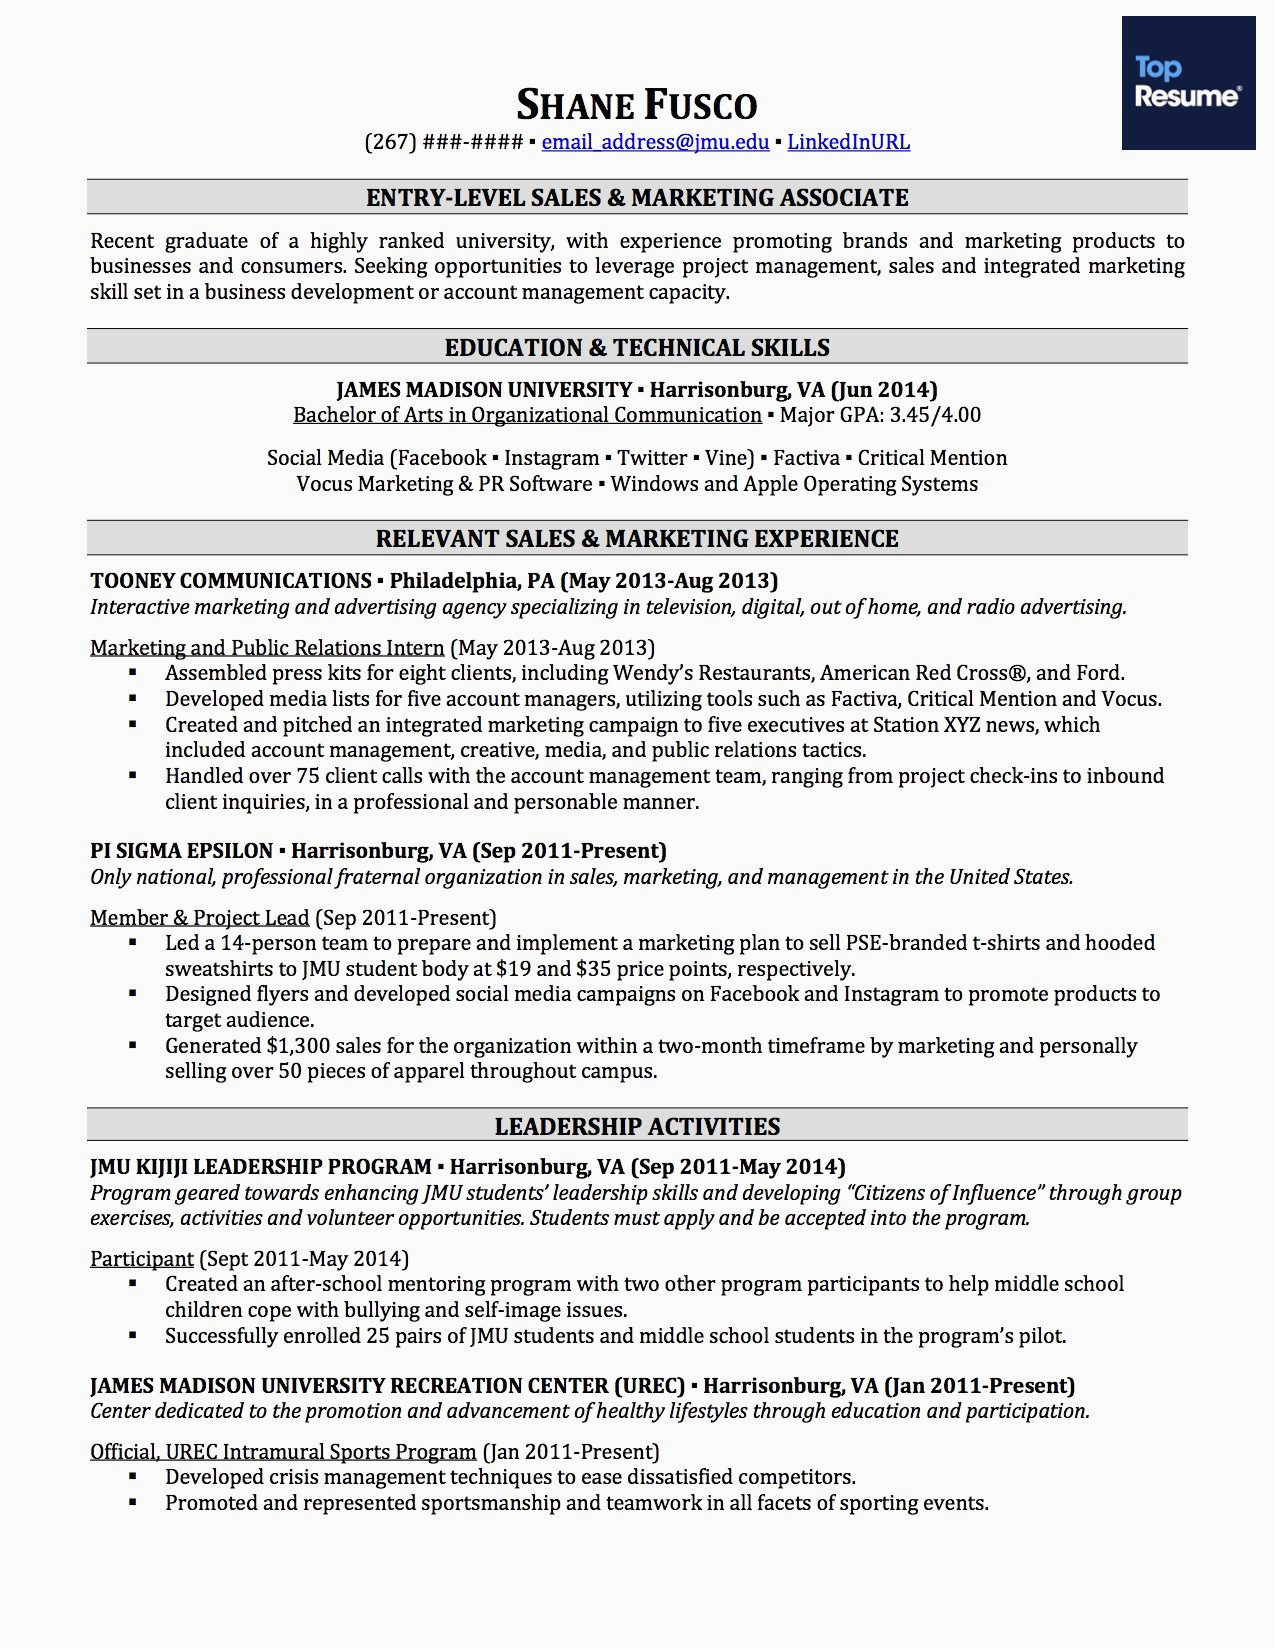 social worker resume with no experience